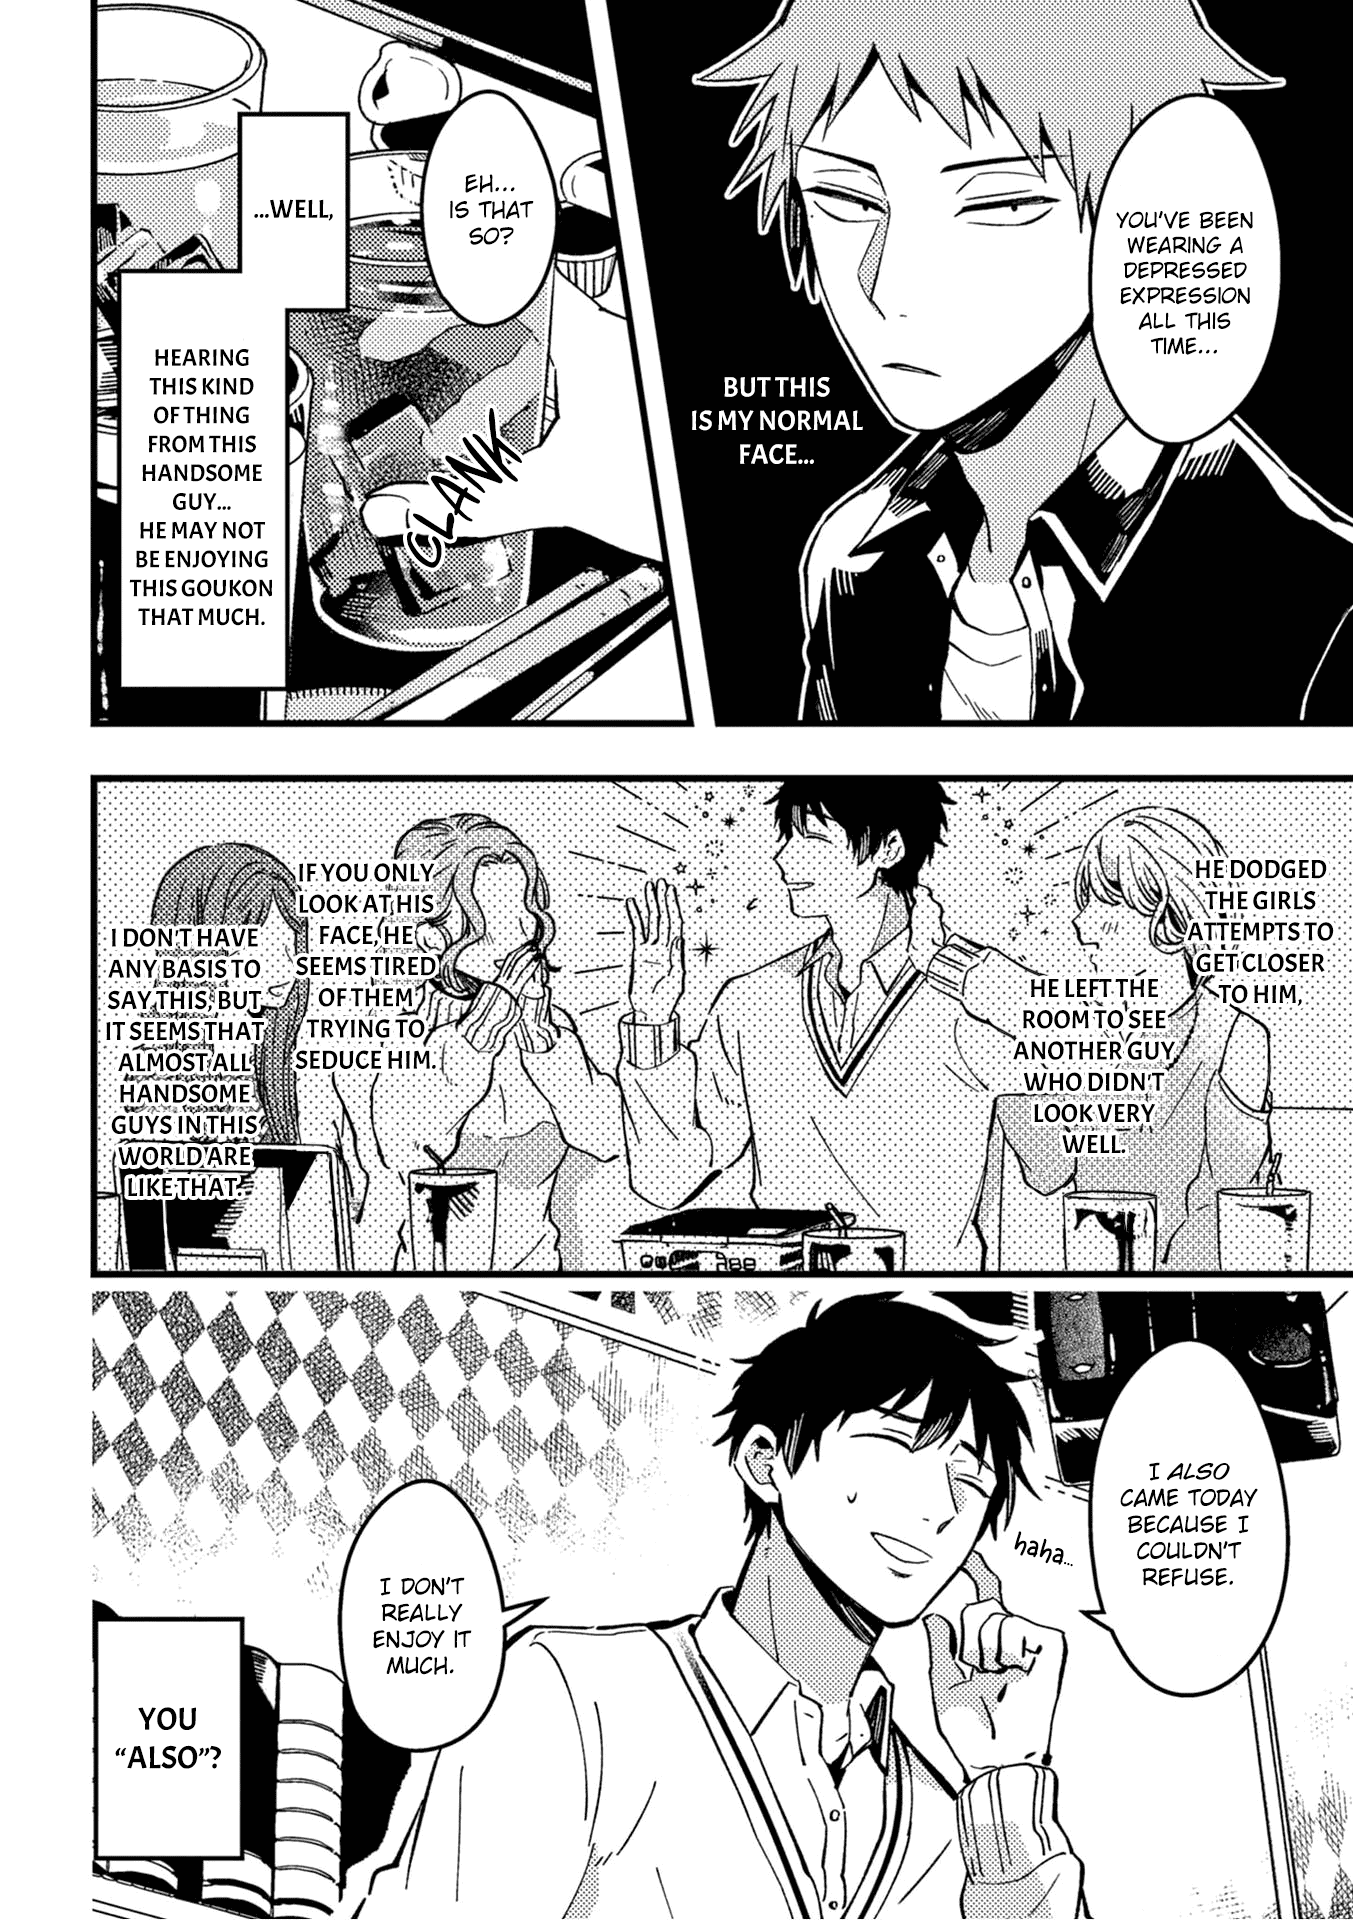 A World Where Everything Definitely Becomes Bl Vs. The Man Who Definitely Doesn't Want To Be In A Bl Vol.2 Chapter 24: Vs Goukon - Second Part - Picture 3